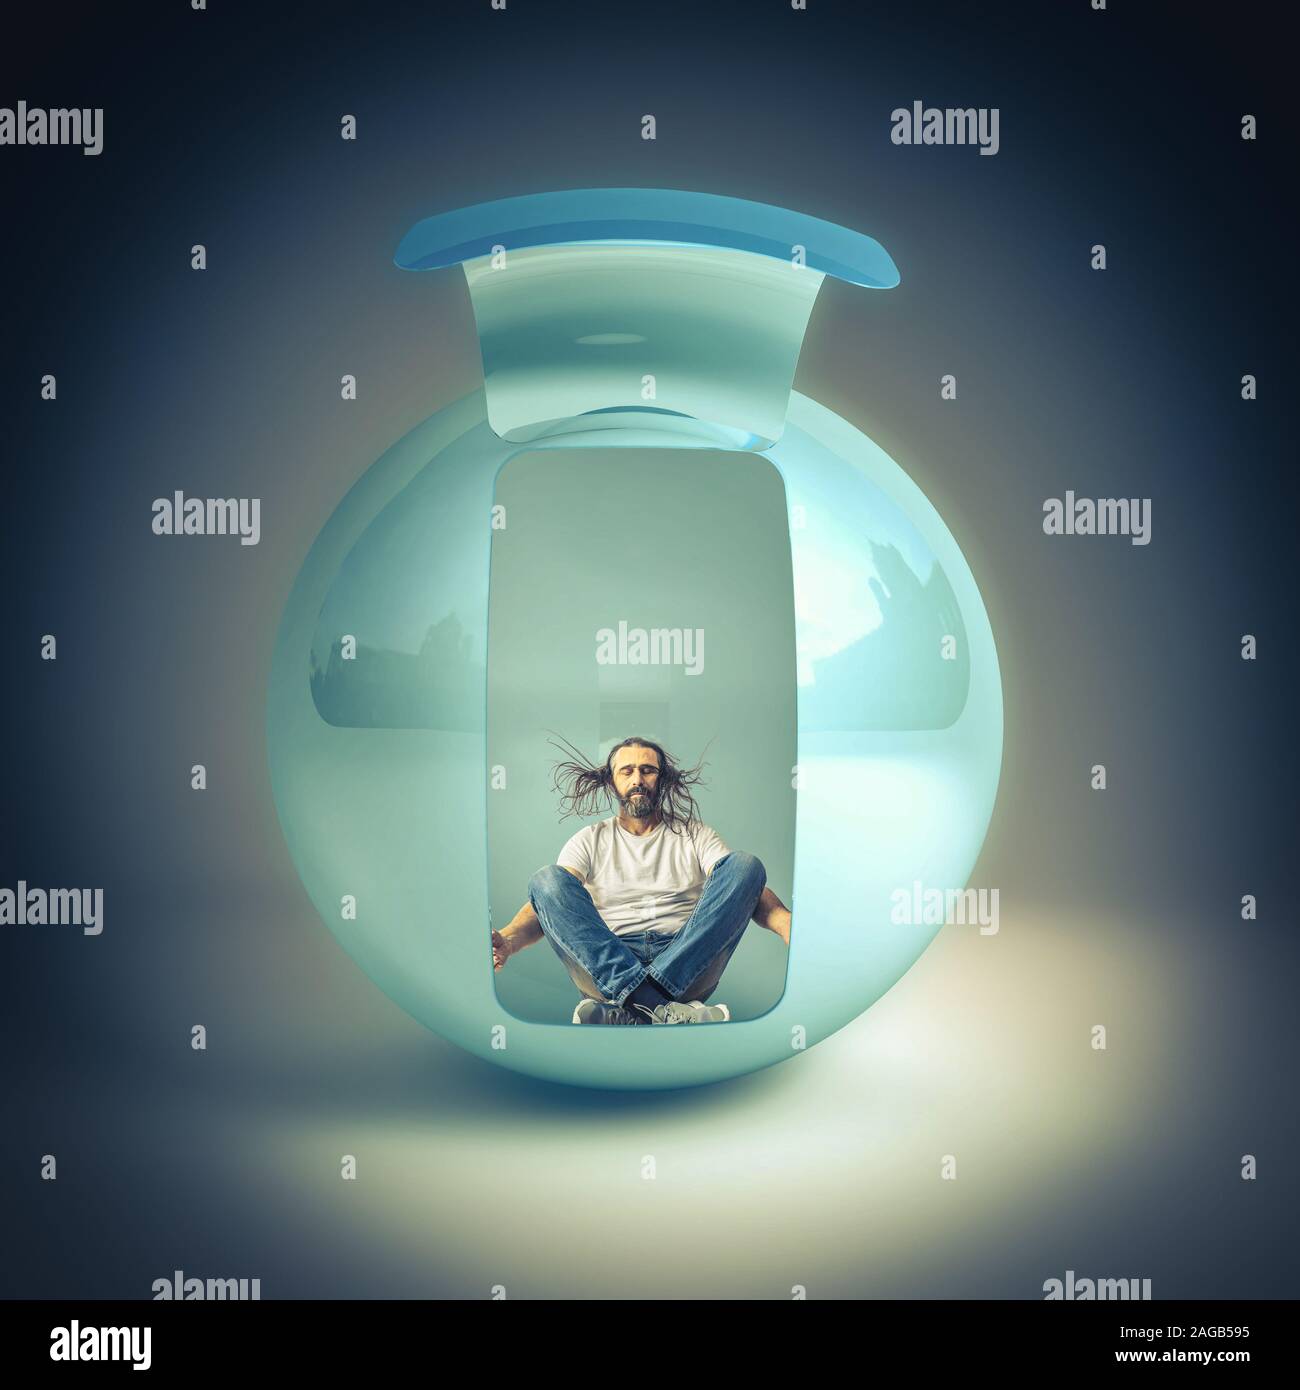 man with long hair sitting inside a sphere meditates with his eyes closed. comfort zone concept. Stock Photo